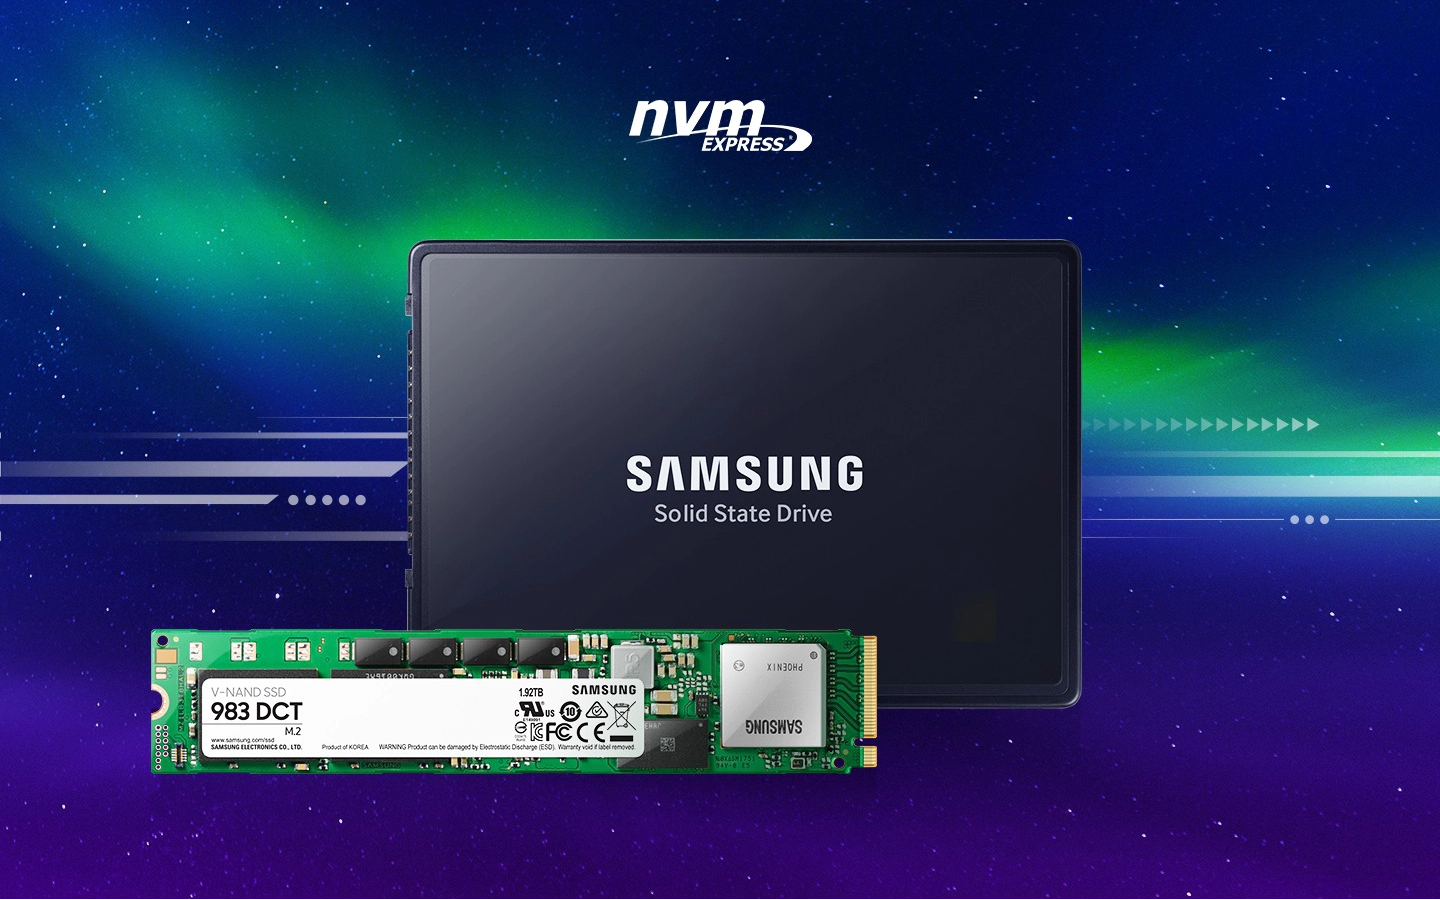 M.2 and 2.5 inch Samsung Data Center SSD 983 DCT with and NVM Express™ logos.